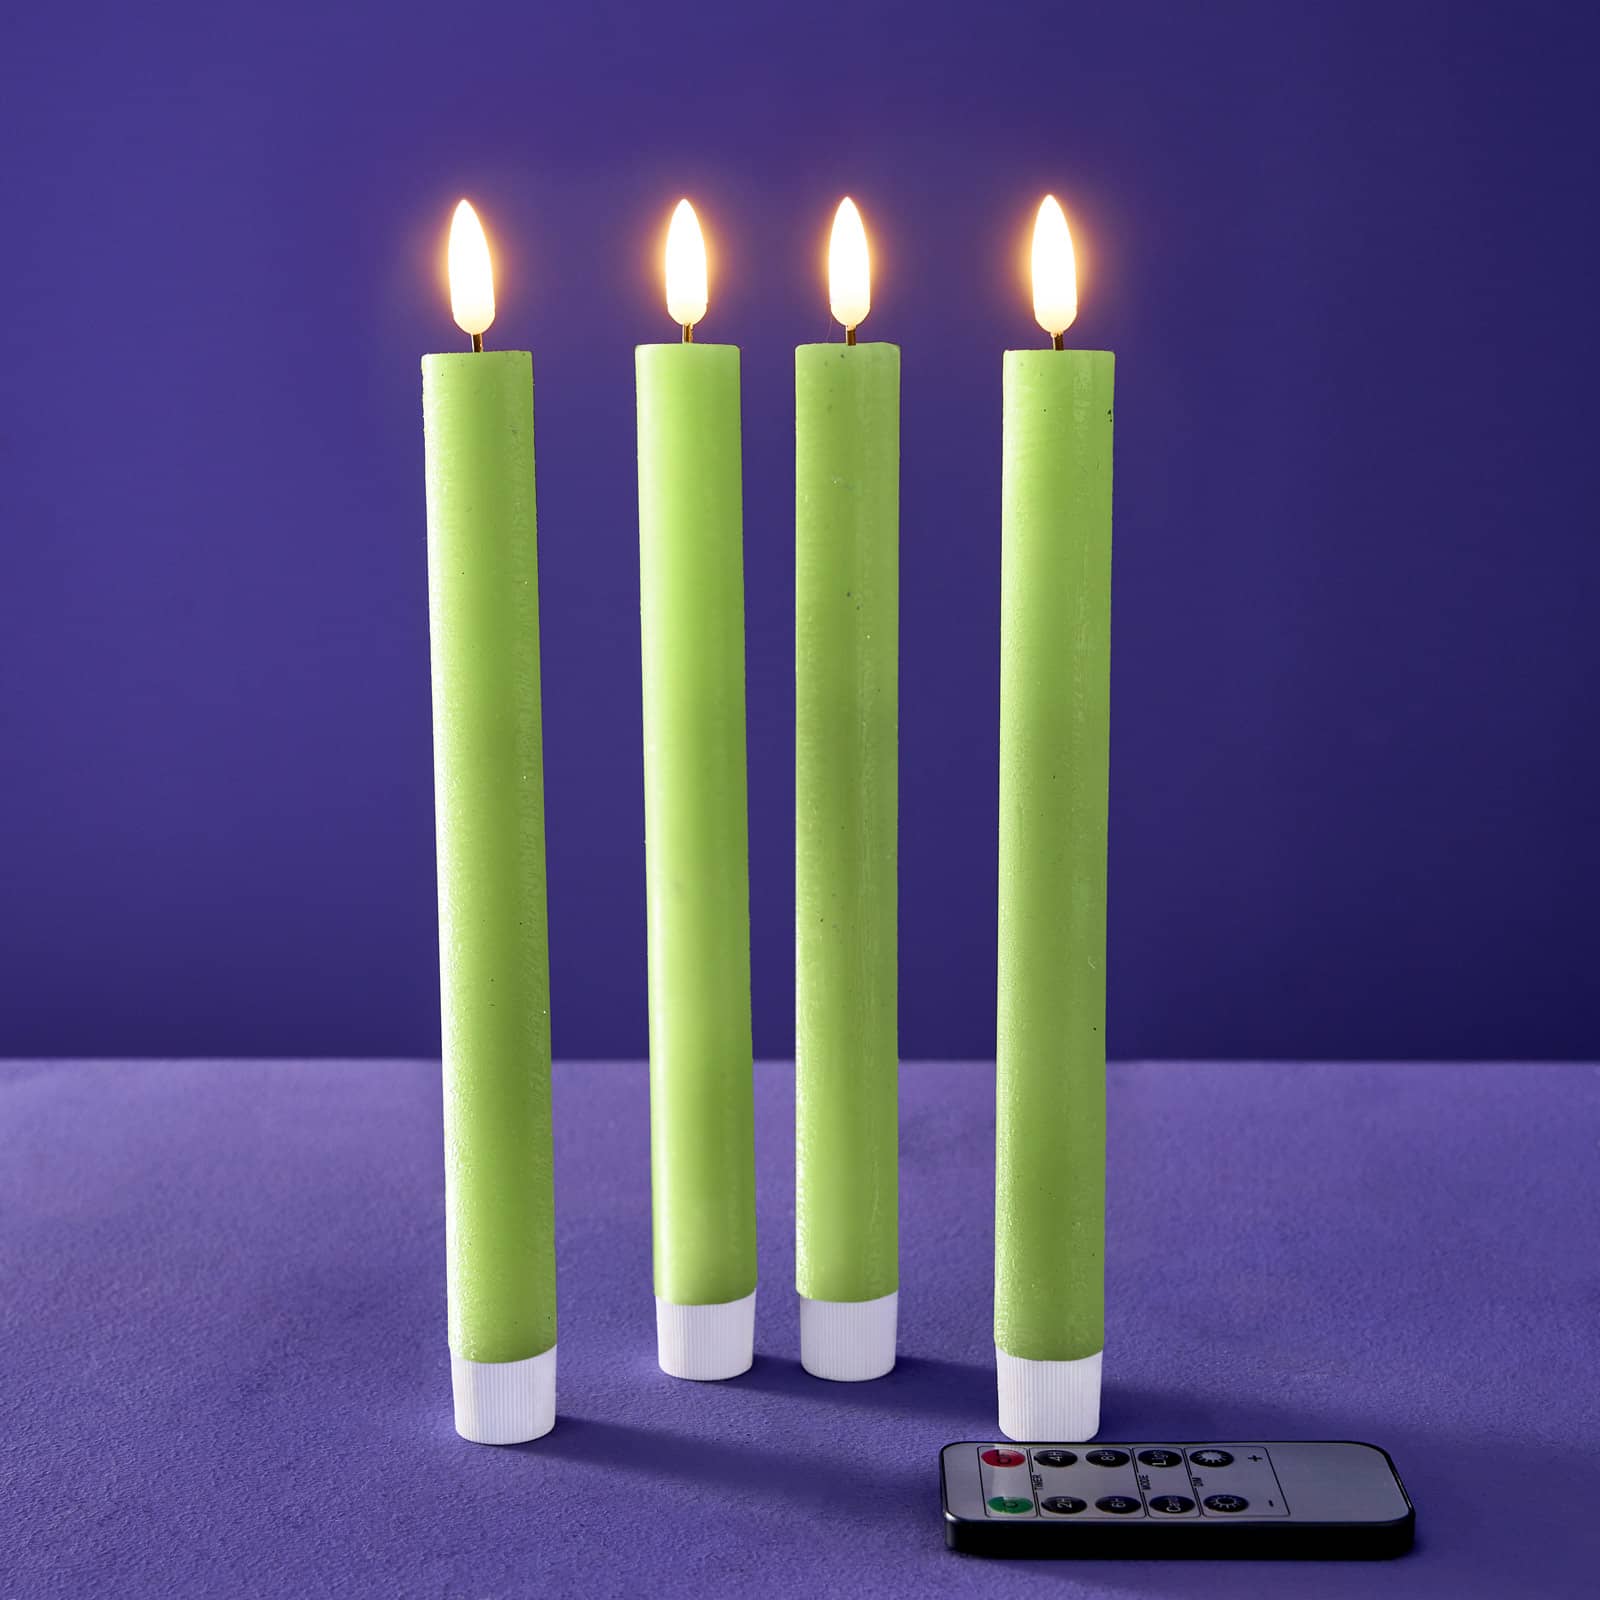 & online Quirky candles | unusual WERNS LED